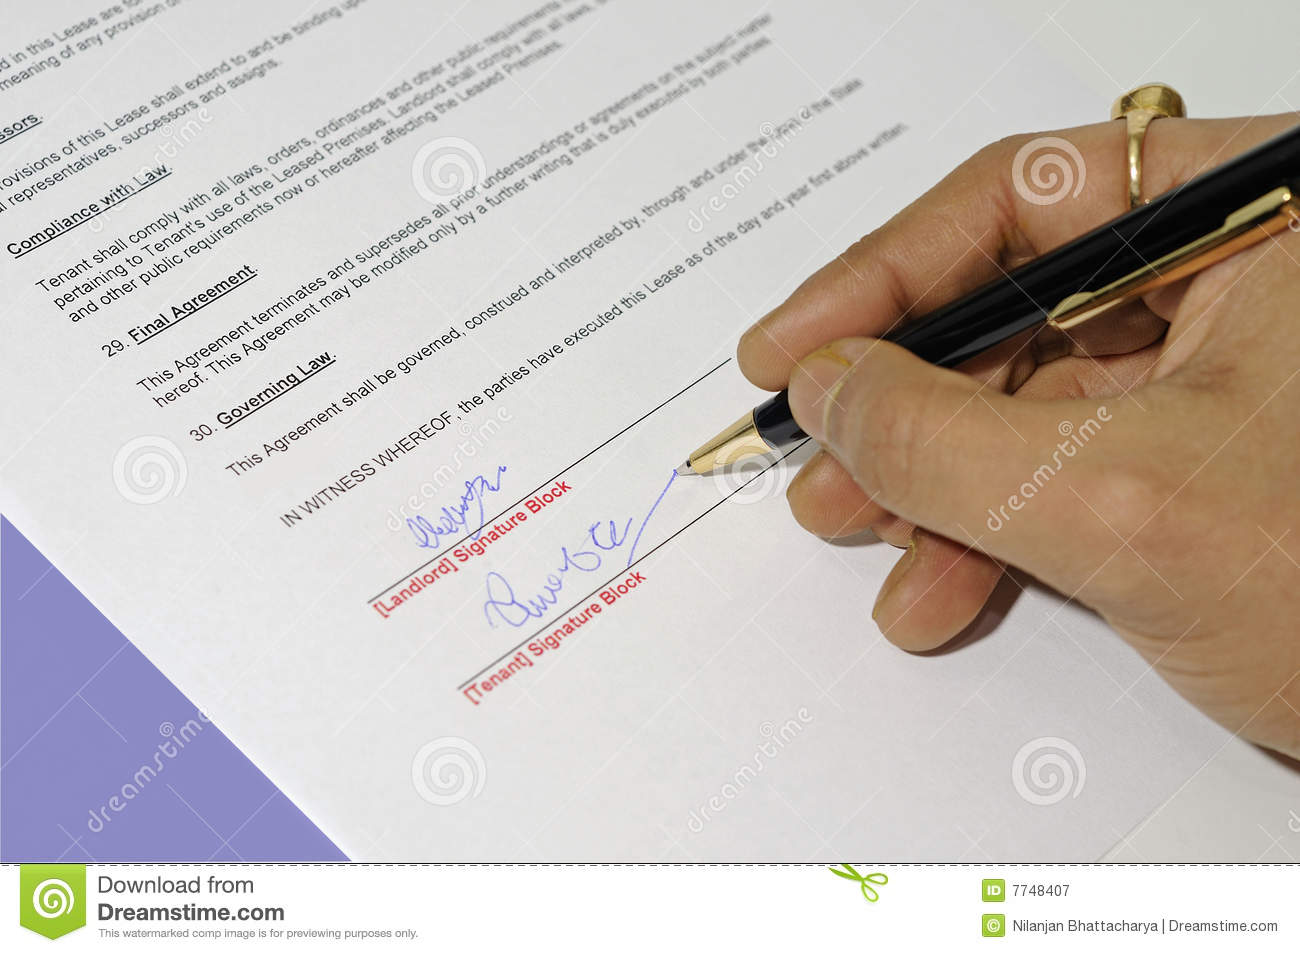 Lease Agreement Being Signed Royalty Free Stock Photography   Image